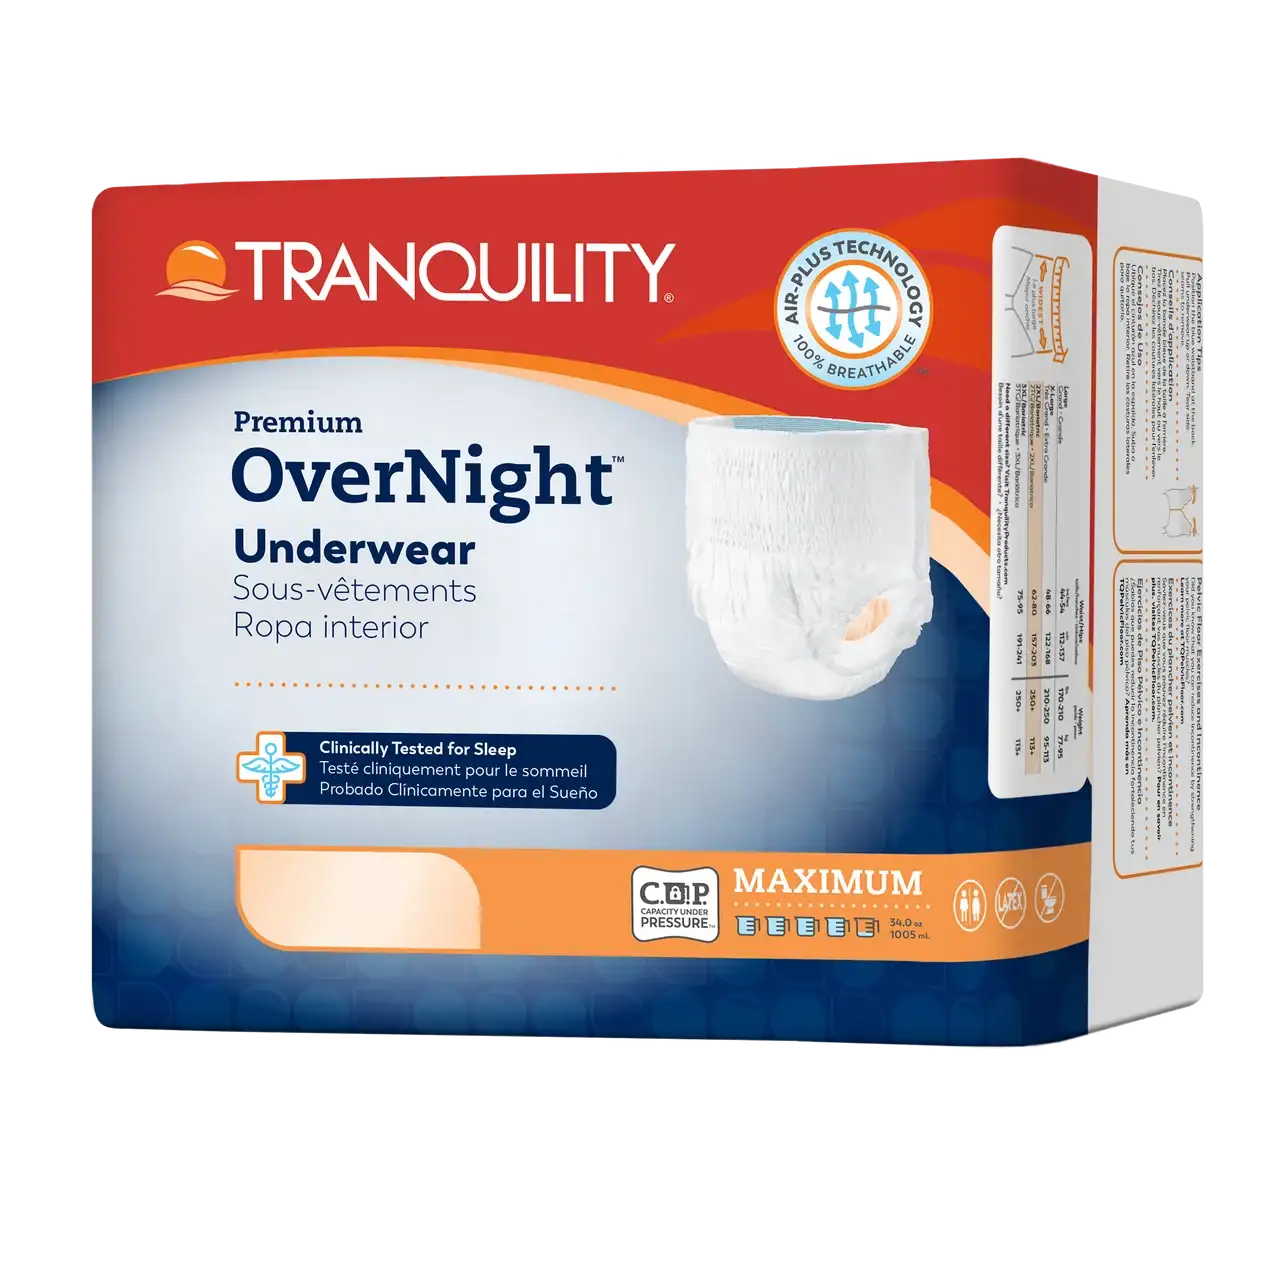 Image of Tranquility Premium Overnight Disposable Absorbent Underwear